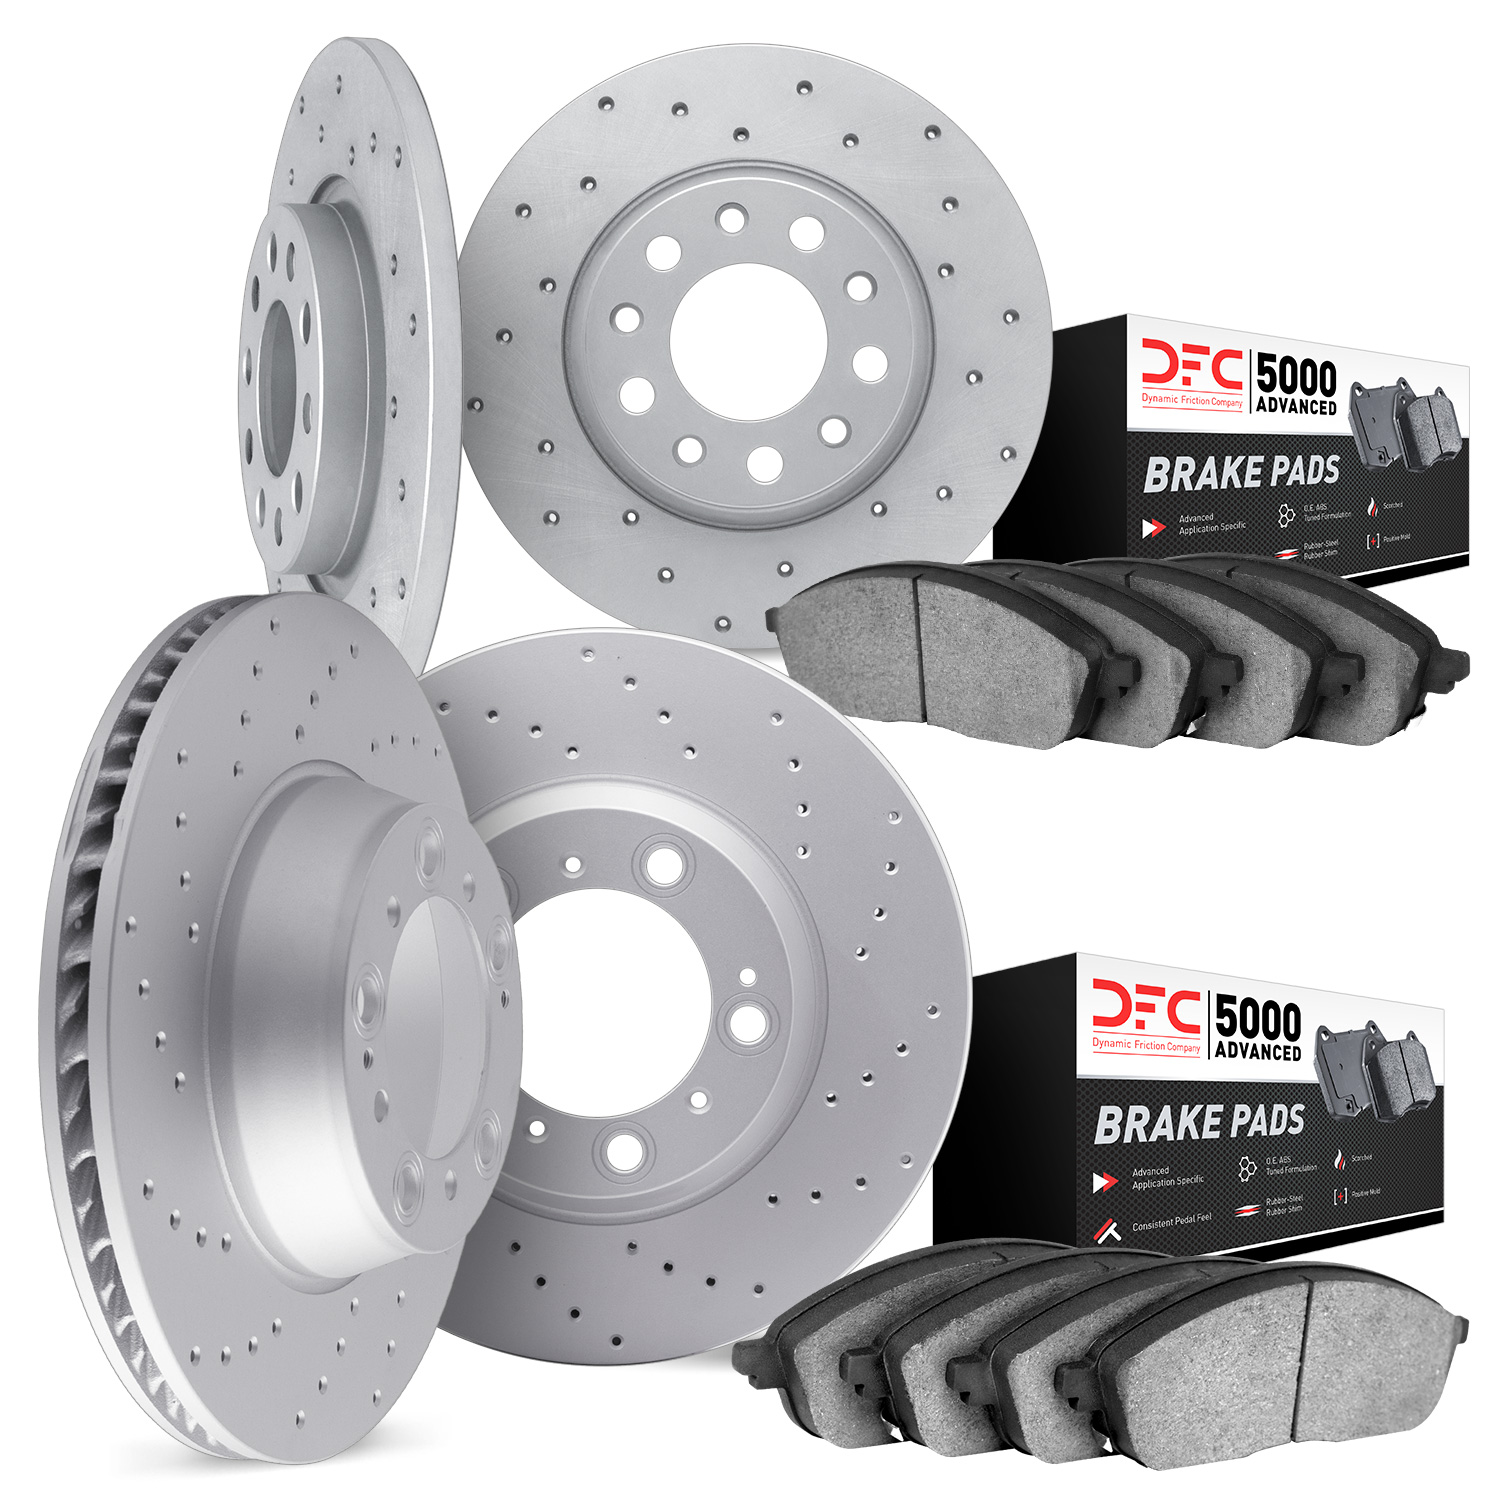 2704-47013 Geoperformance Drilled Brake Rotors with Active Performance Pads Kit, 2008-2008 GM, Position: Front and Rear